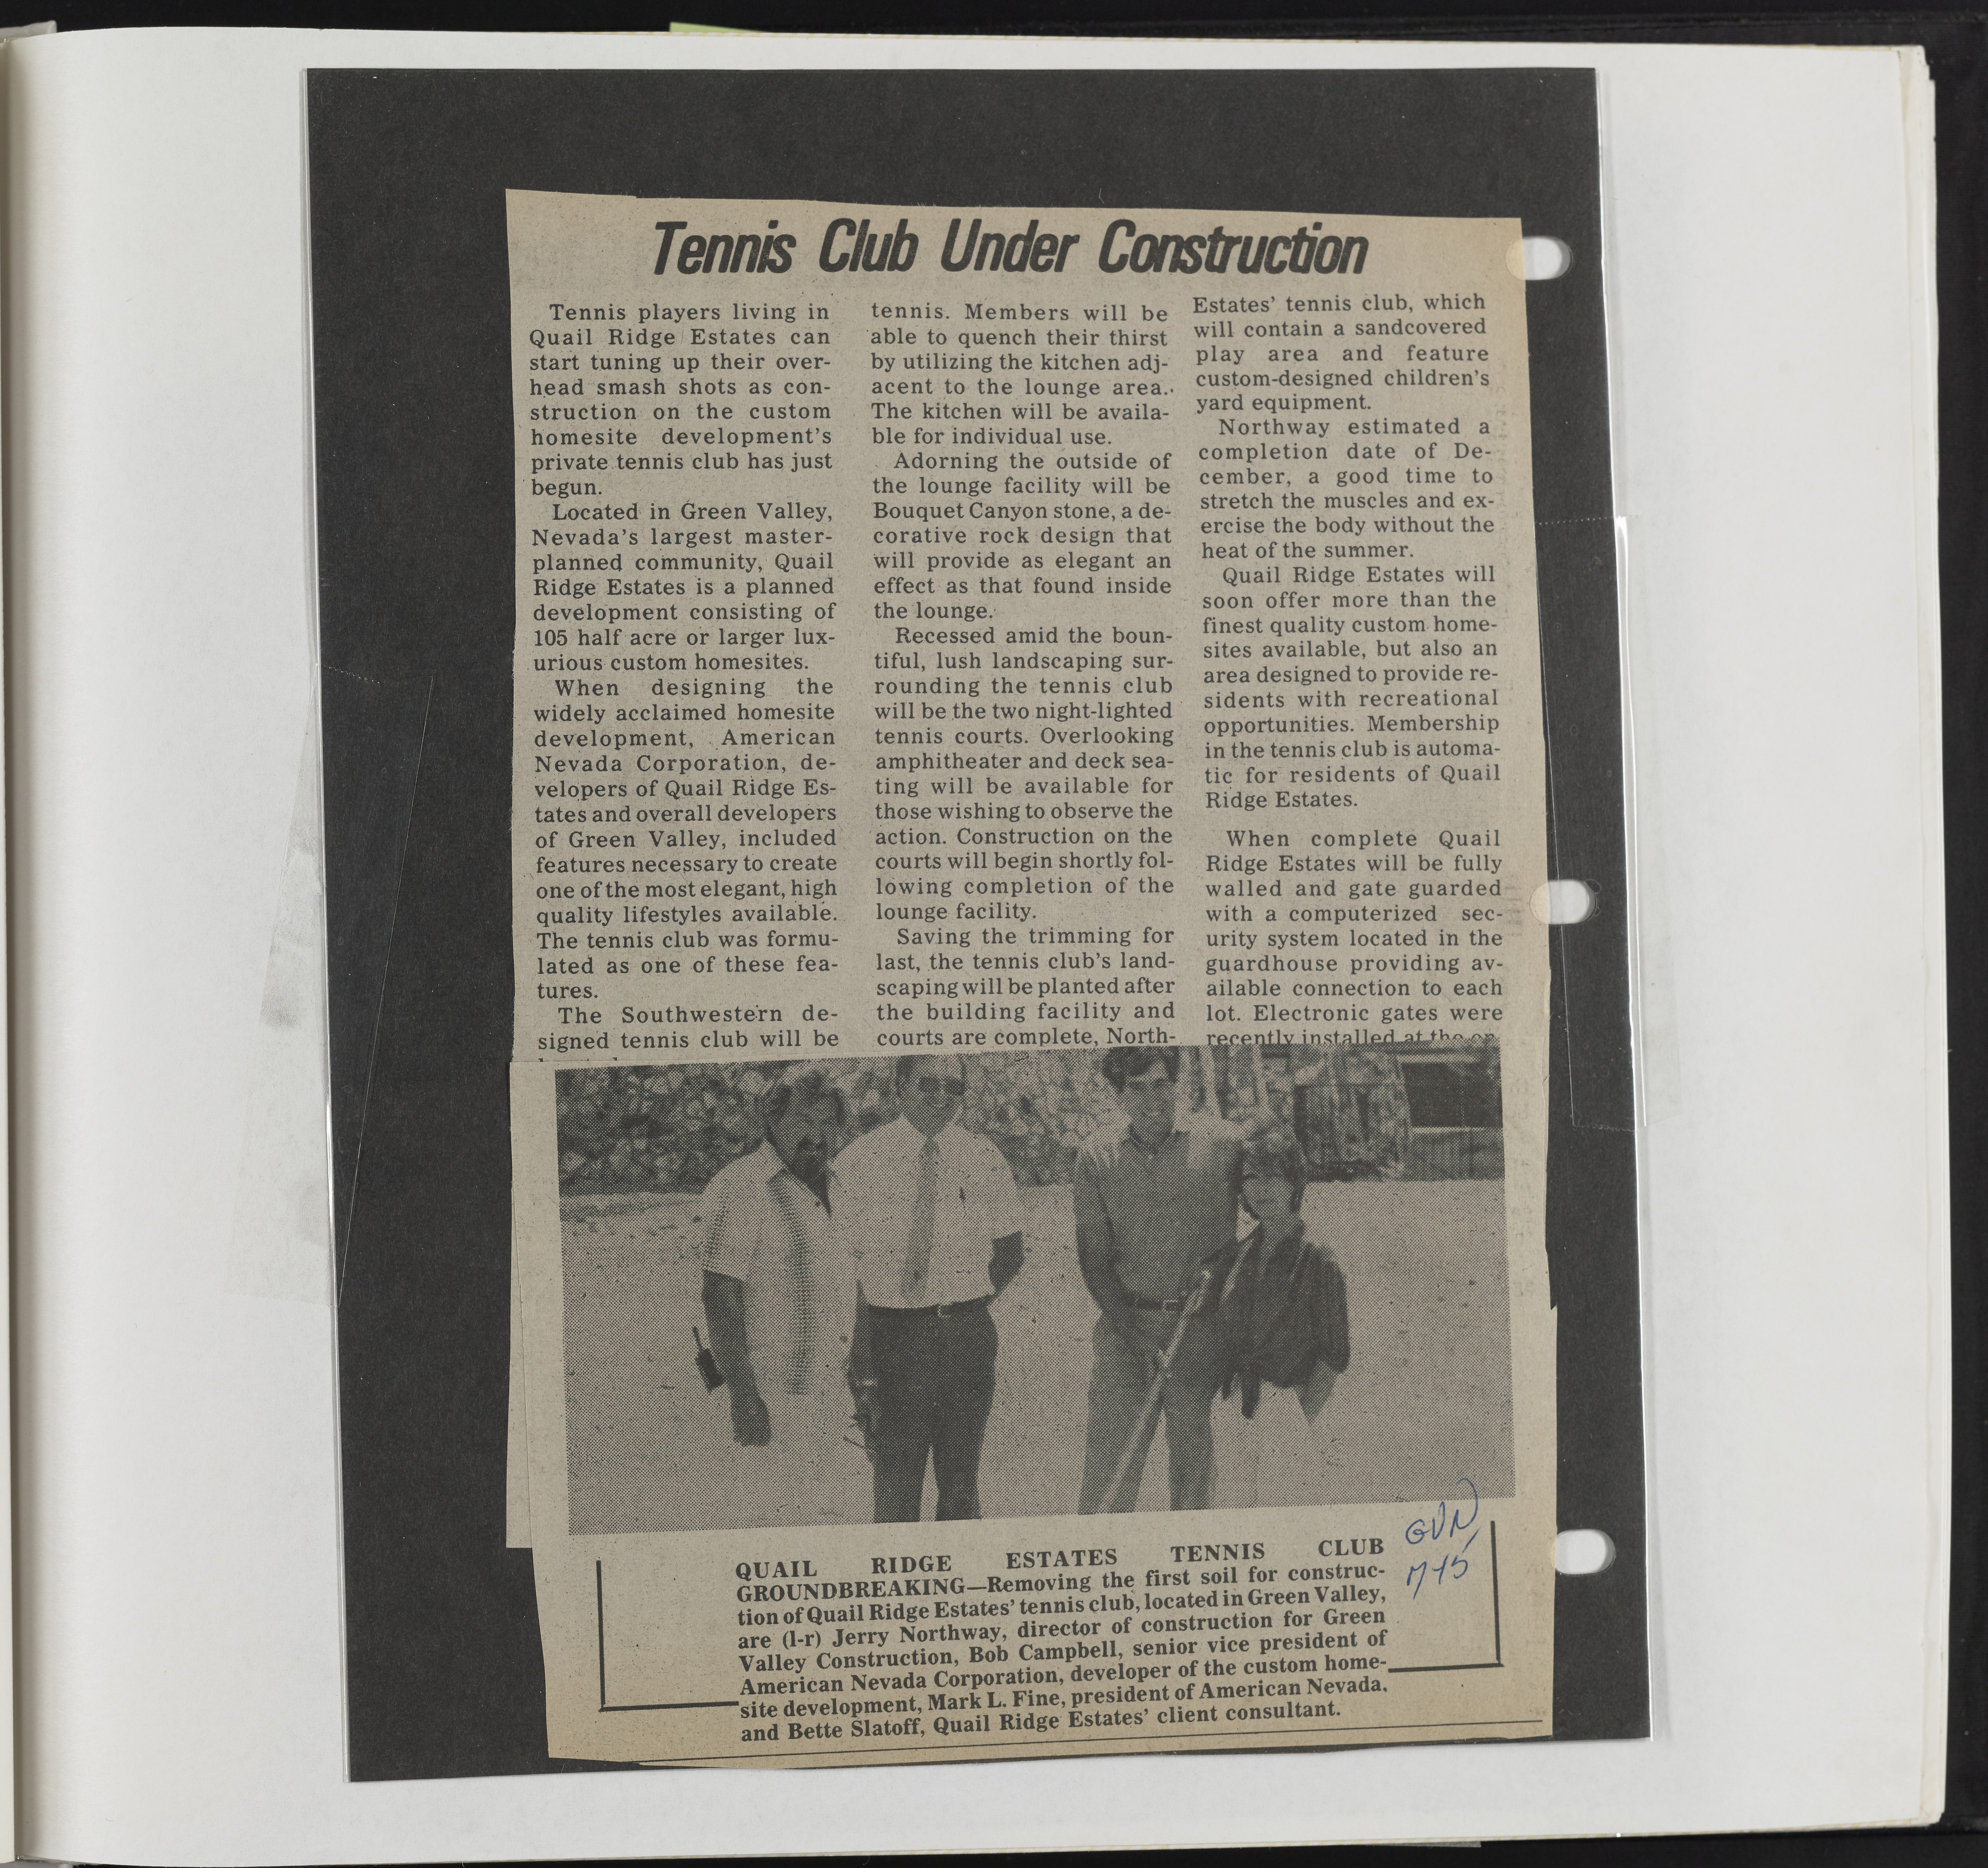 Newspaper clipping, Tennis Club Under Construction, Green Valley News, July 15, 1982